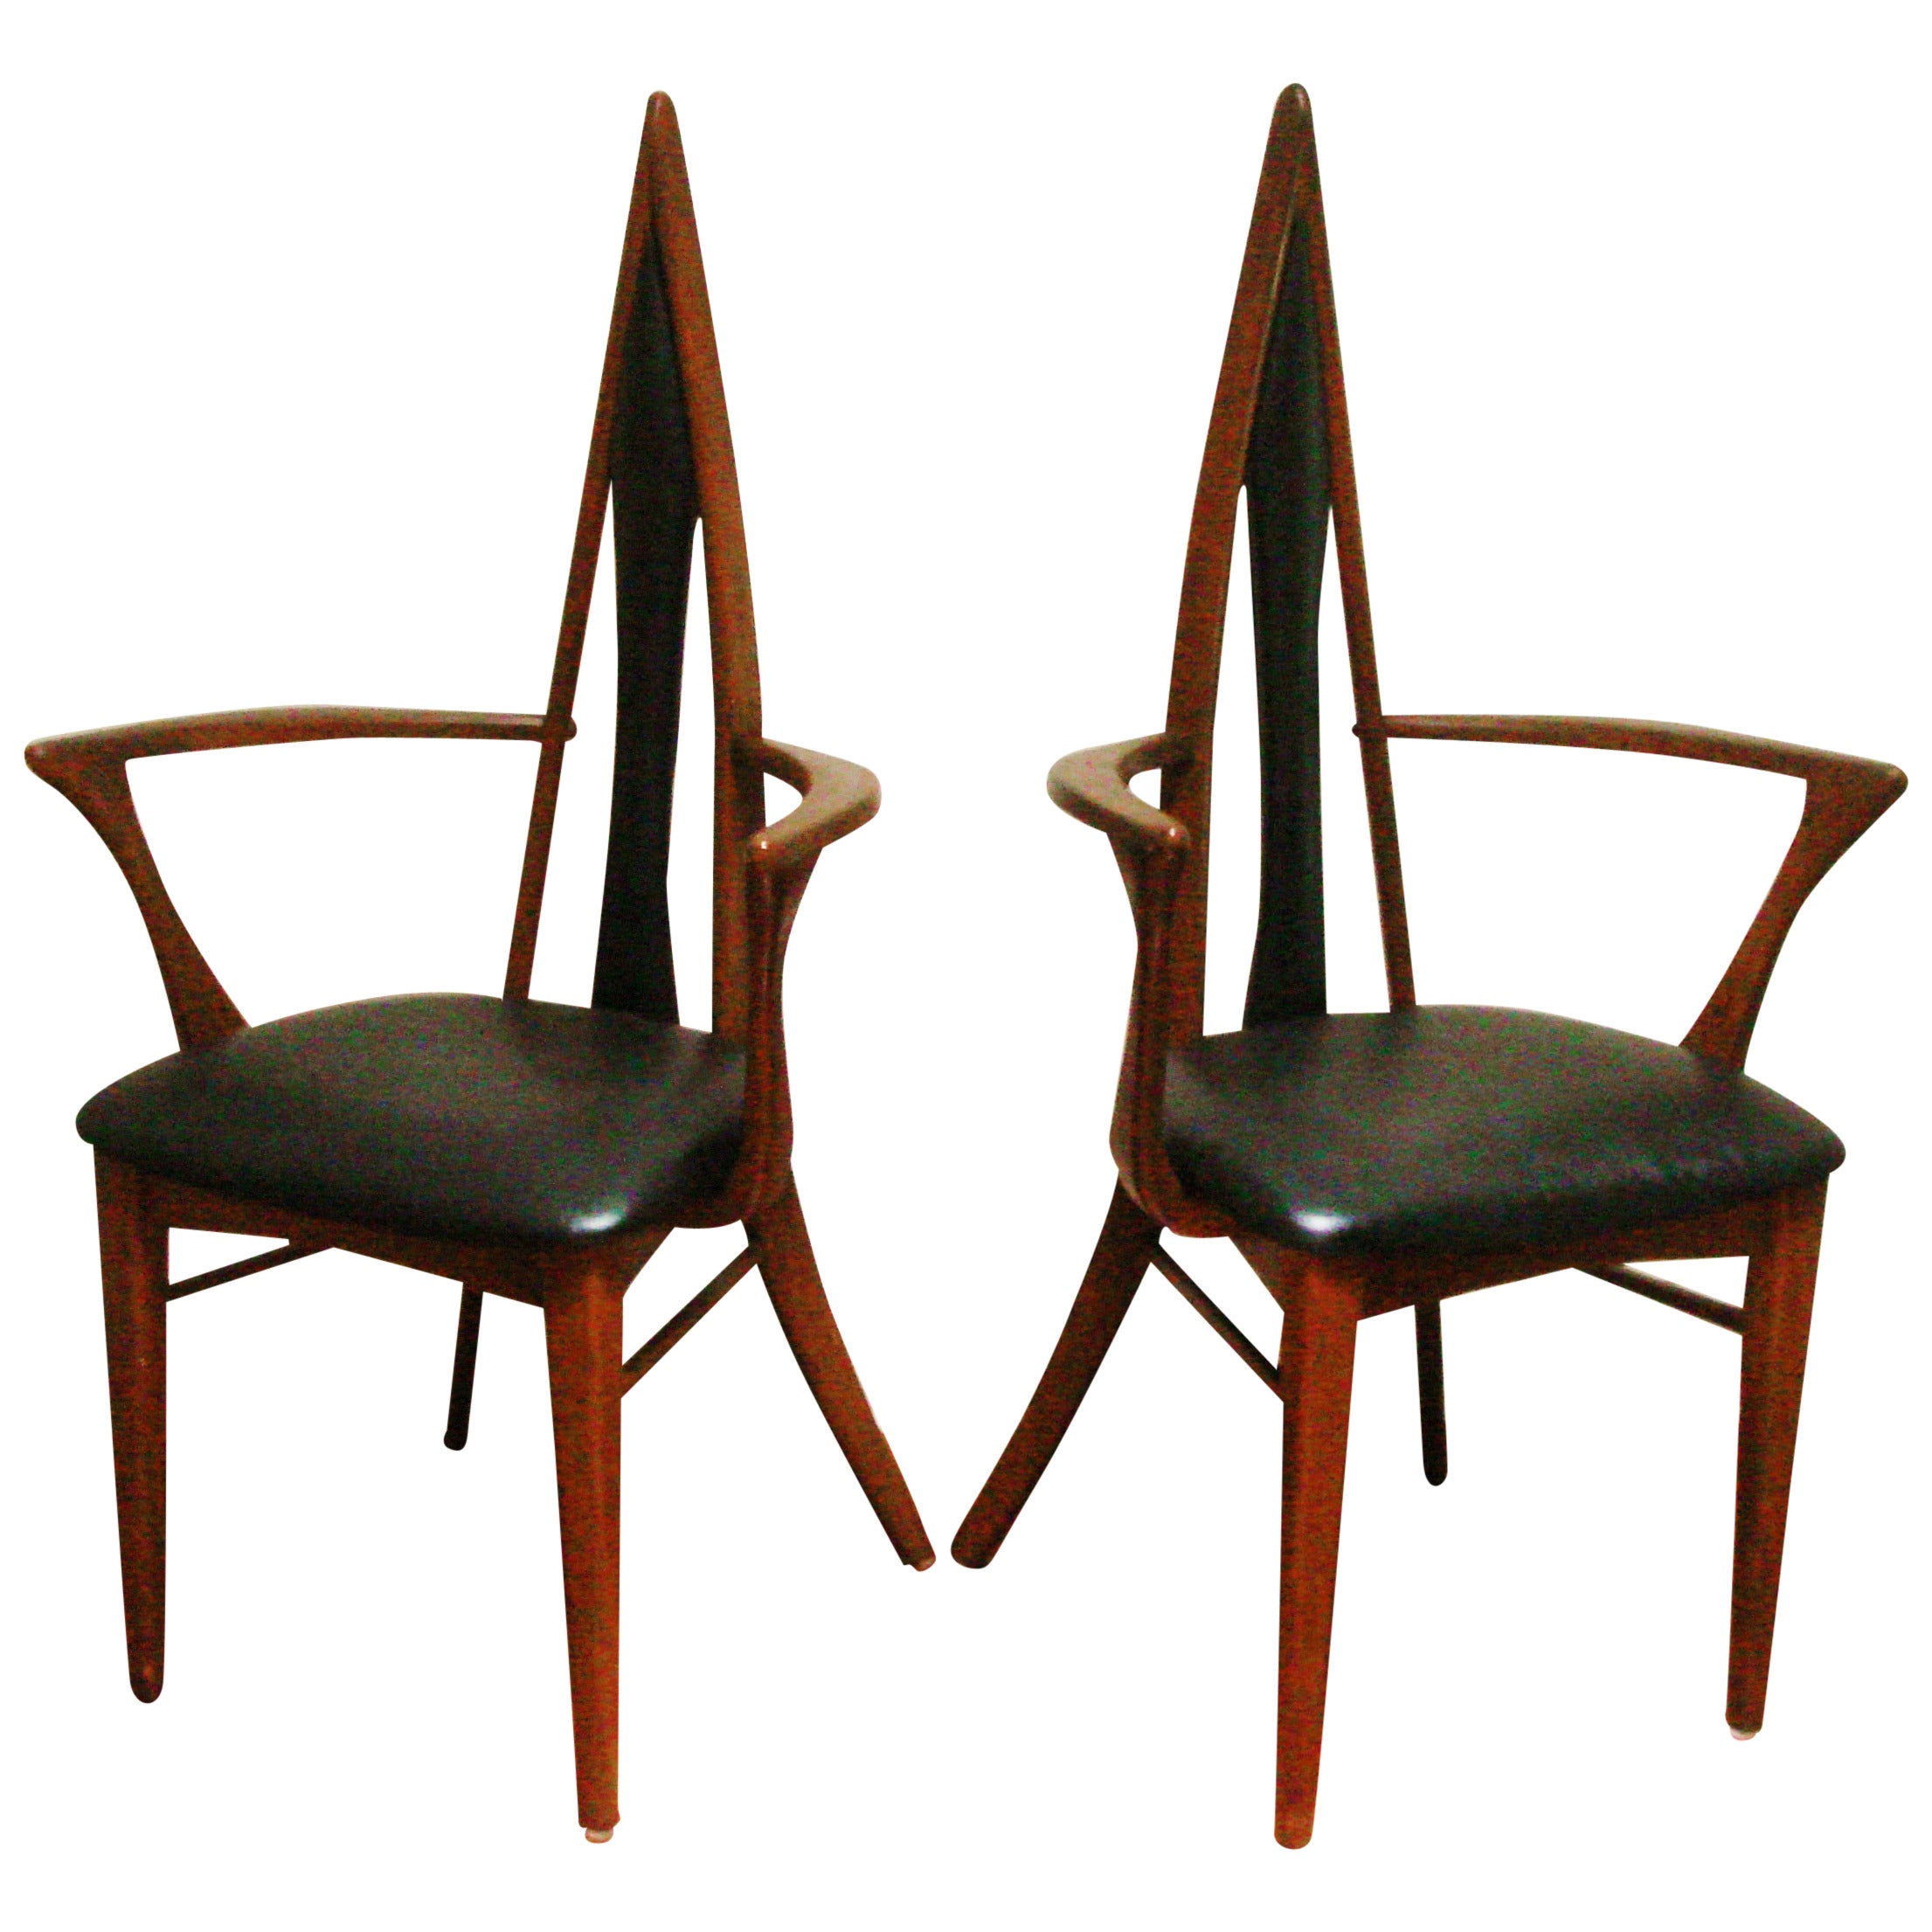 Pair of Canadian Mid Century Biomorphic Salon Chairs by Danis et Frères